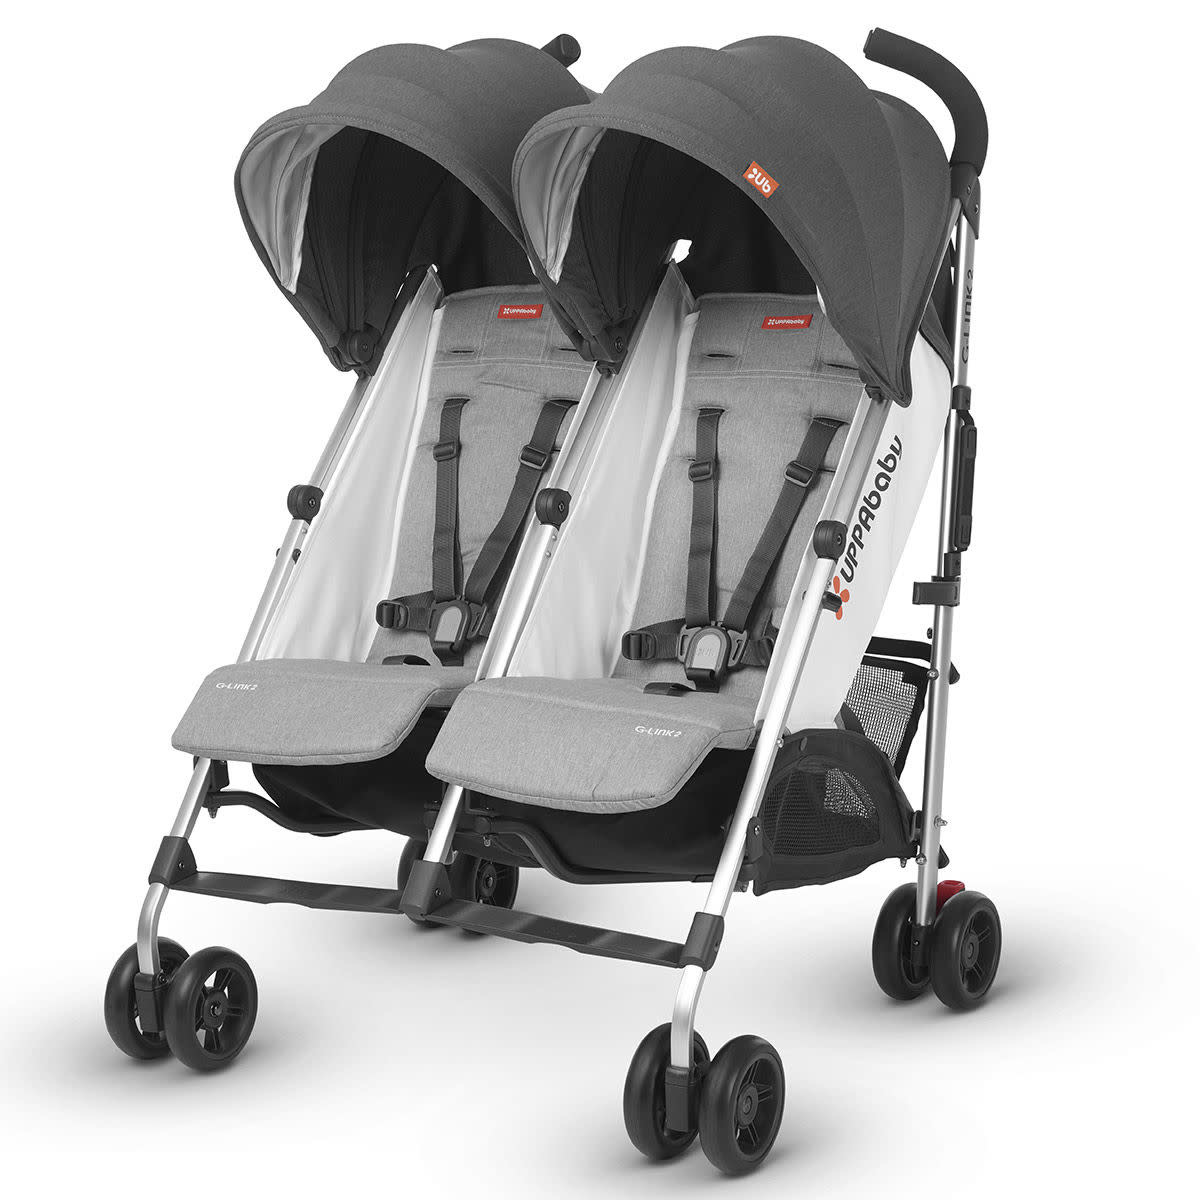 https://cdn.shoplightspeed.com/shops/605079/files/15927181/uppababy-uppababy-g-link-poussette-parapluie-doubl.jpg